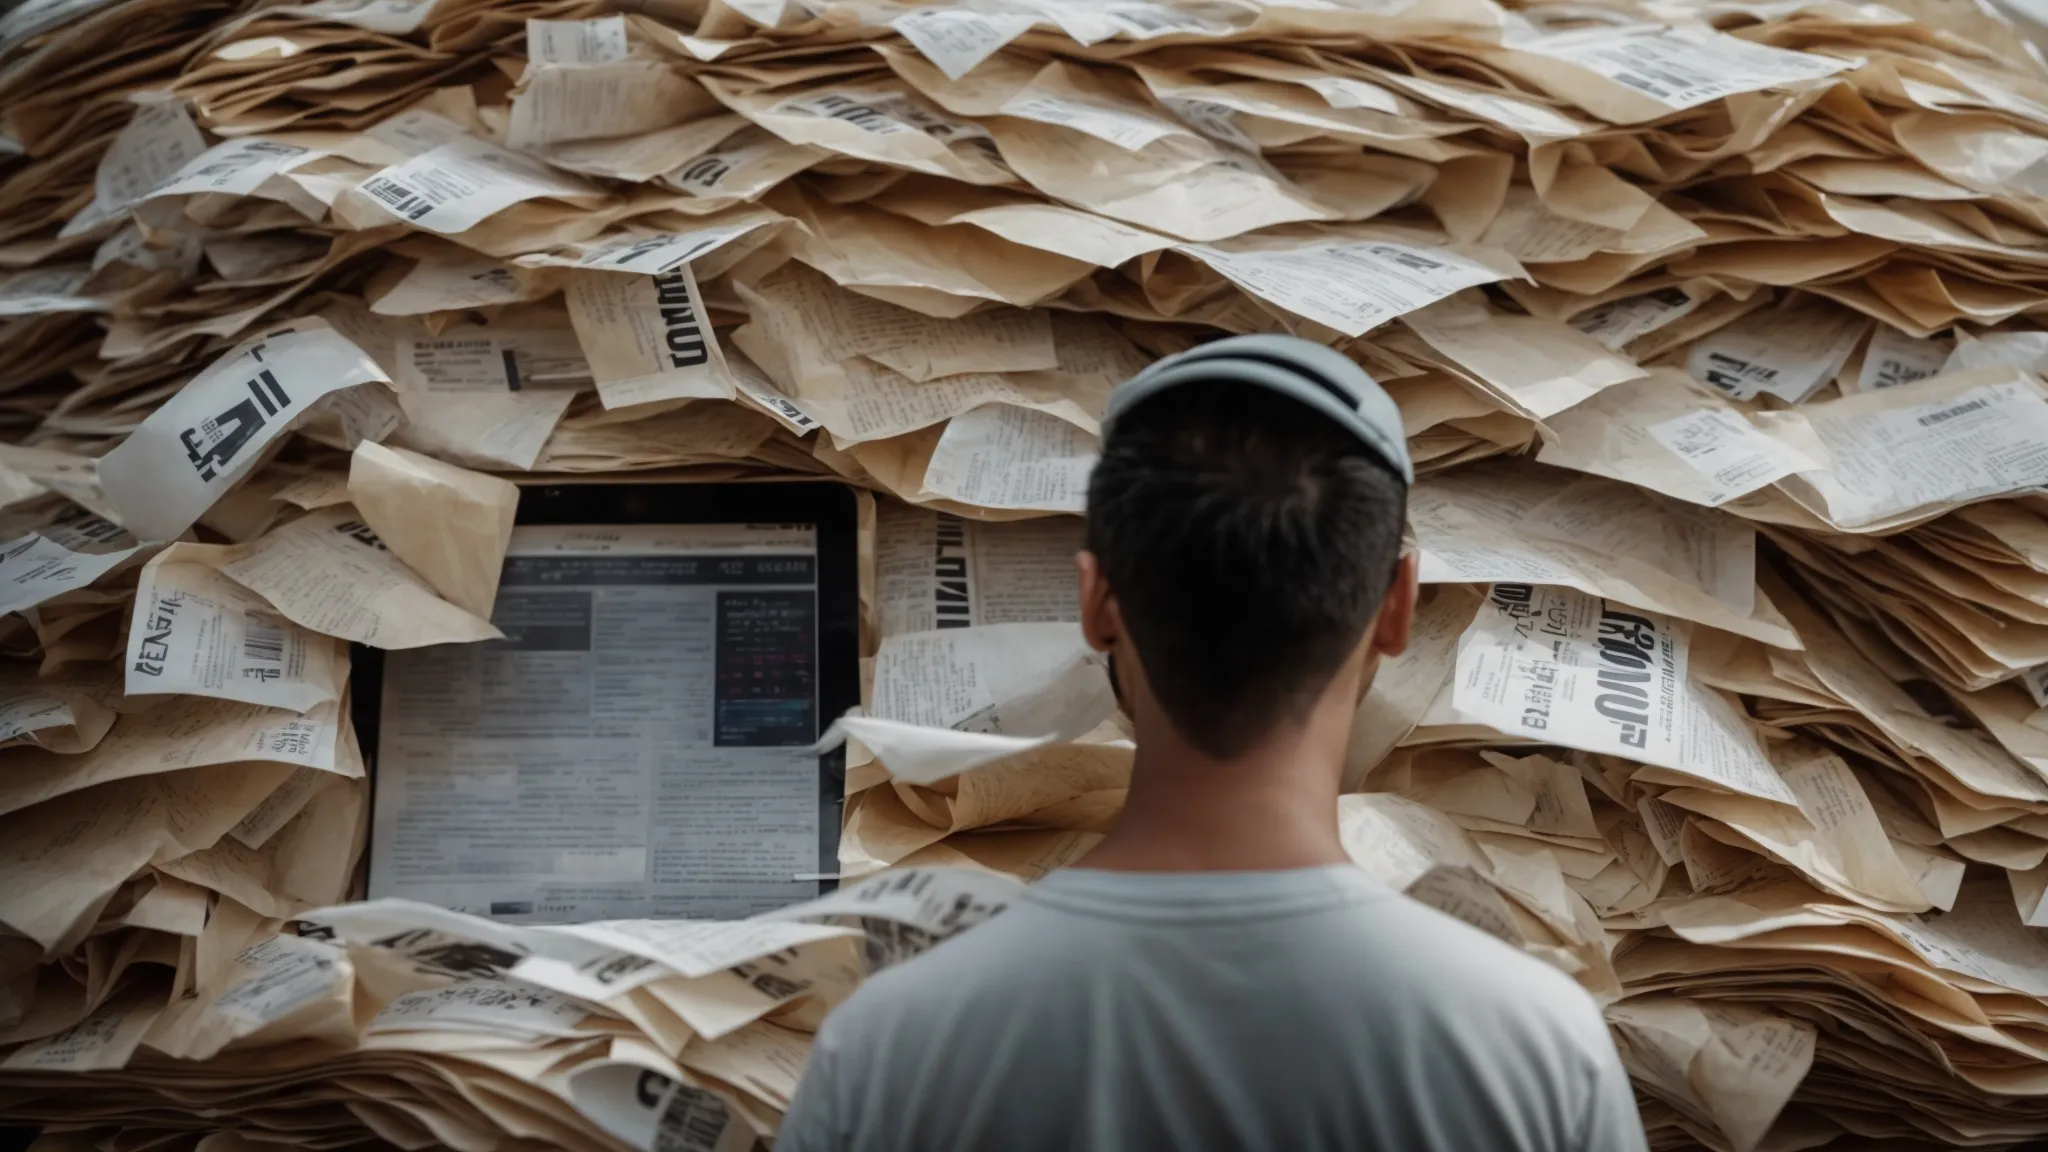 a person perplexedly scrutinizing a heap of crumpled papers labeled 